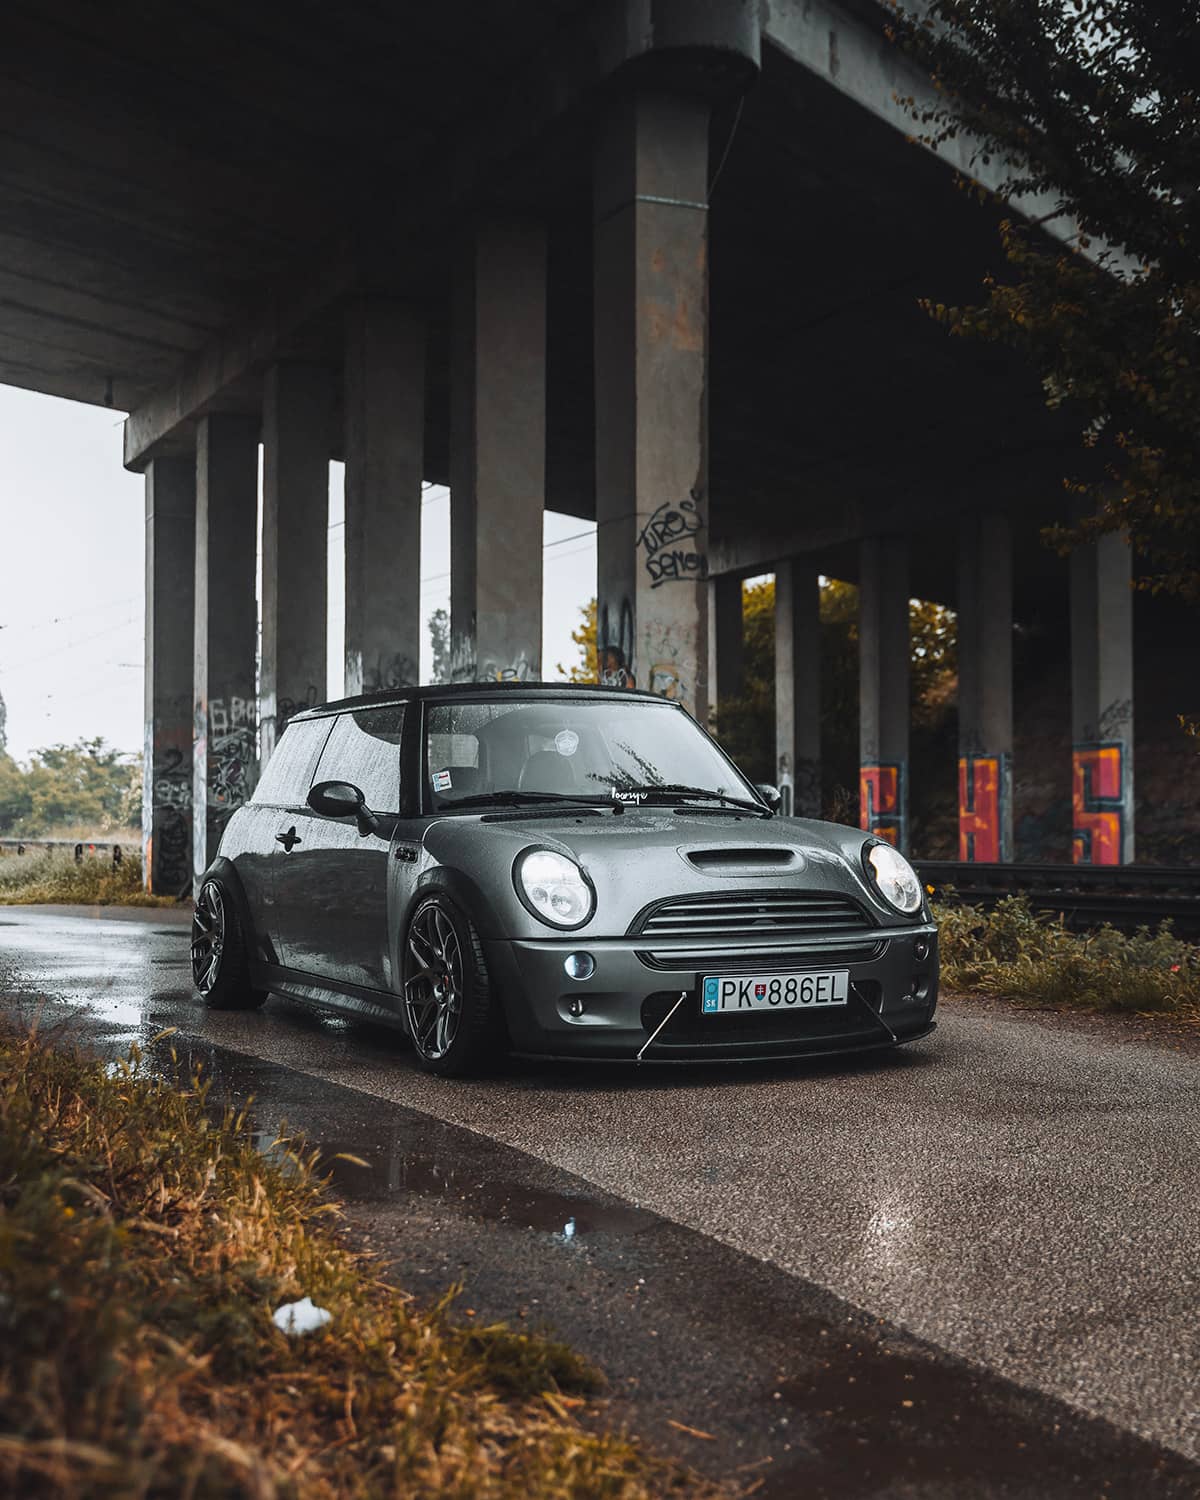 Stanced Mini Cooper S with air suspension